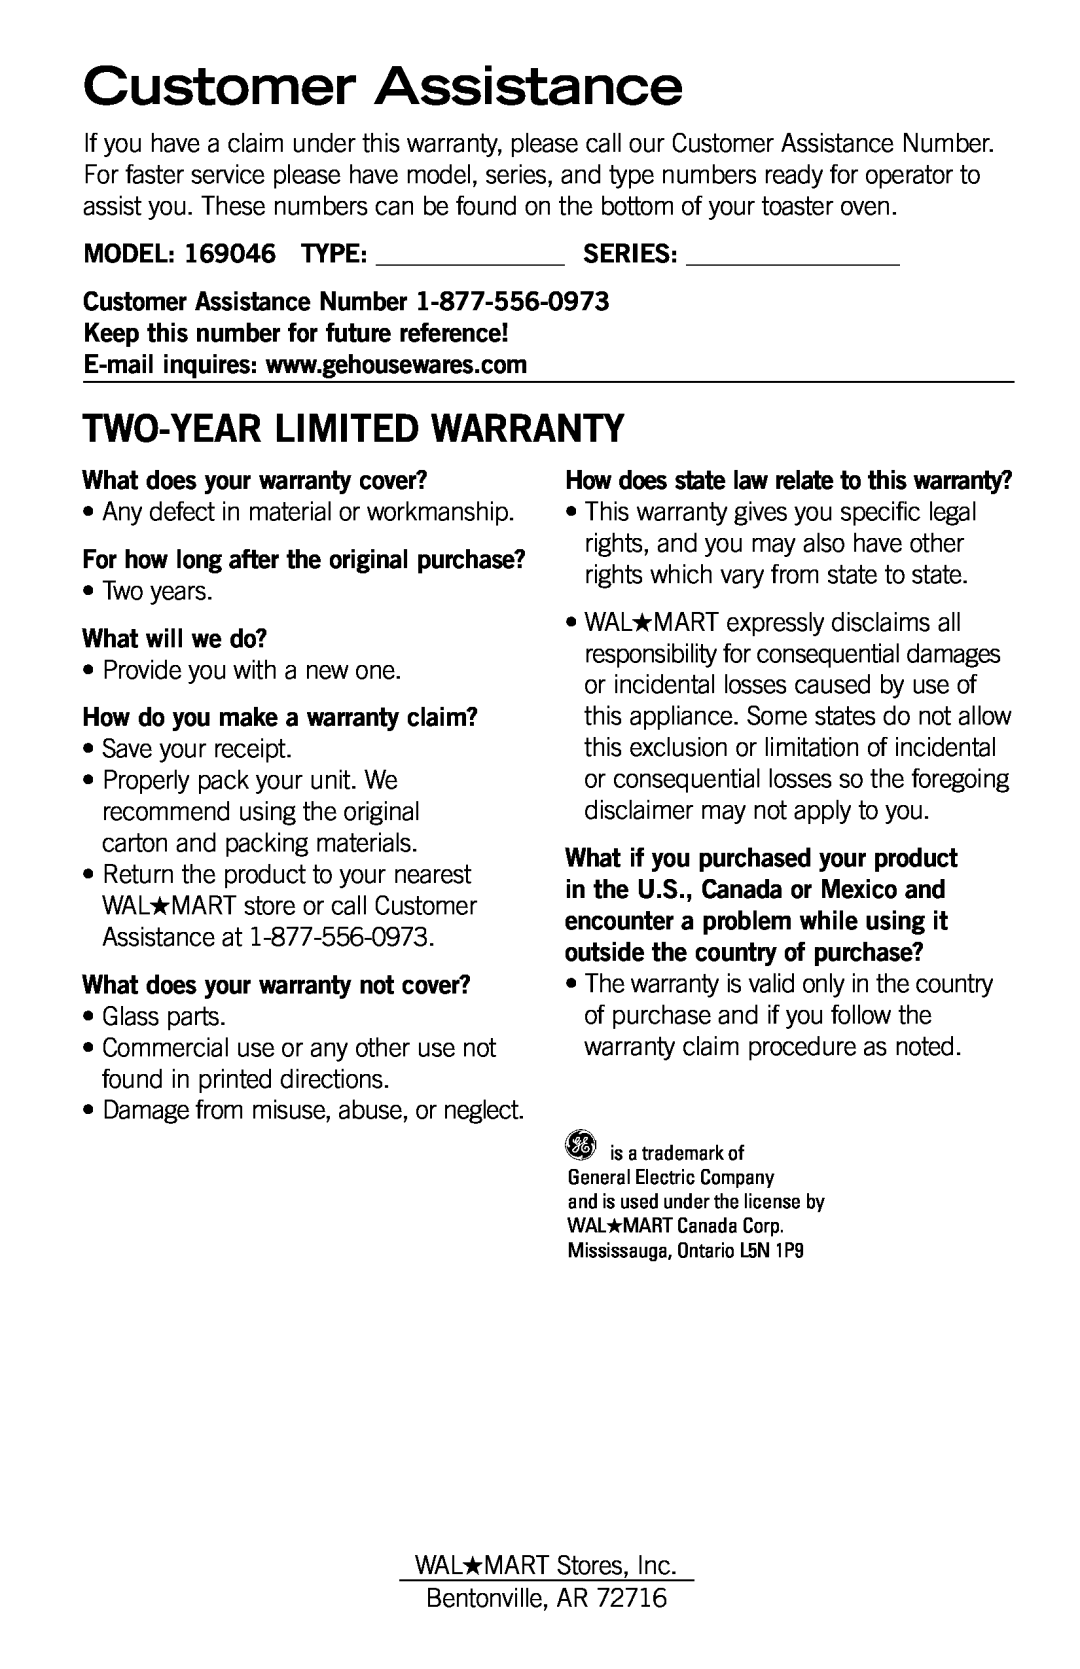 GE 4681131690461 manual Customer Assistance, Two-Yearlimited Warranty, What does your warranty cover?, What will we do? 